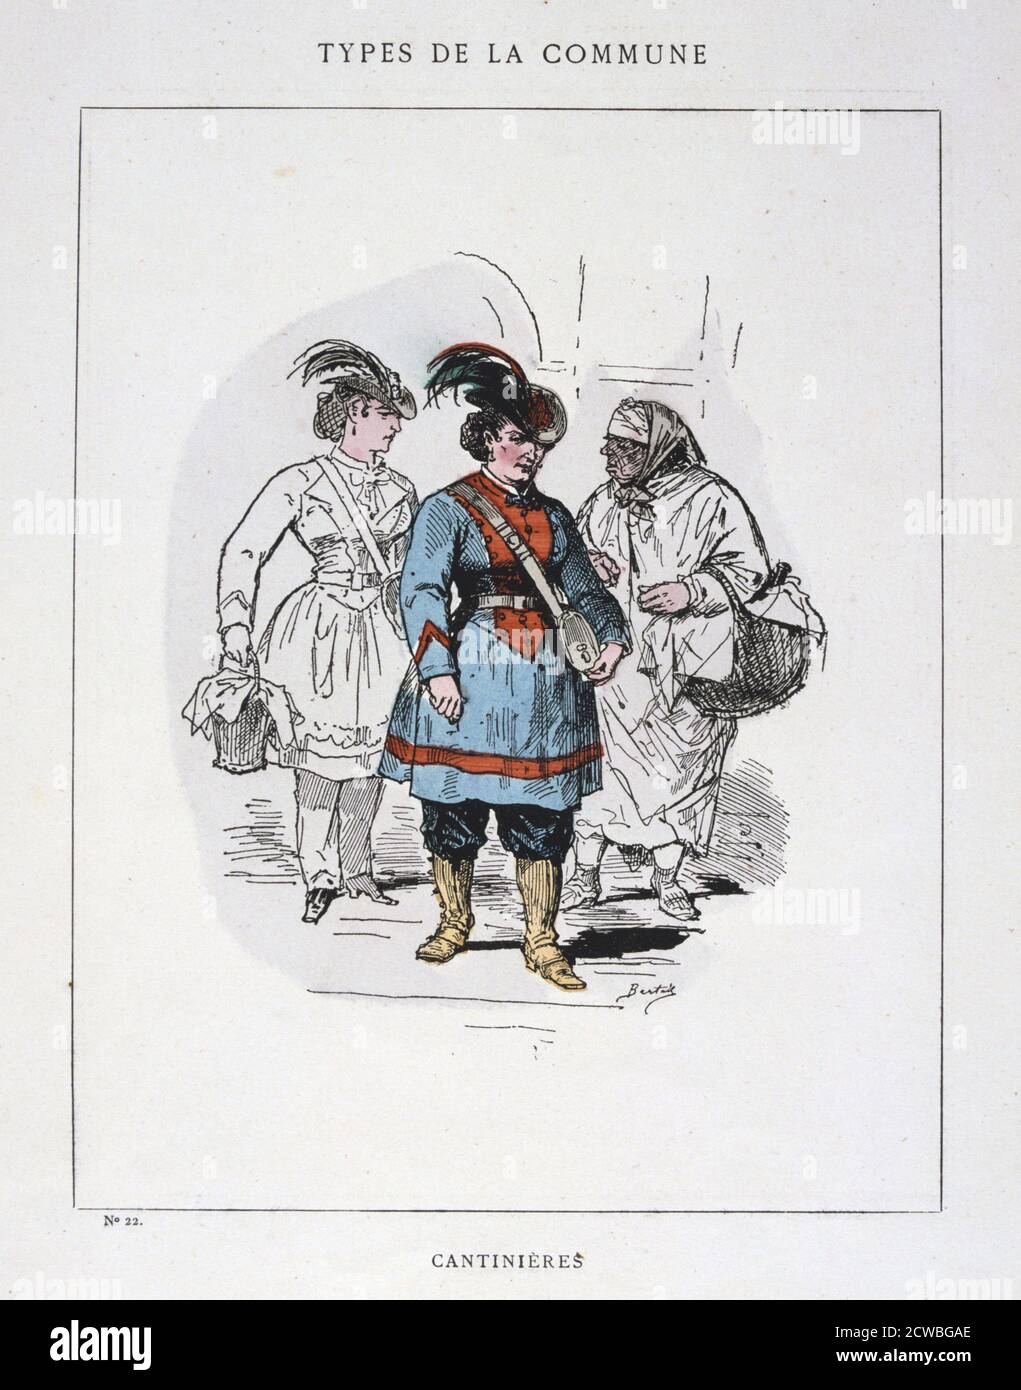 Cantinieres', Paris Commune, 1871. Cartoon from a series titled Types de la Commune. The Paris Commune was established when the citizens of Paris, many of them armed National Guards, rebelled against the policies of the conservative government formed after the end of the Franco-Prussian War. The left-wing regime of the Commune held sway in Paris for two months until government troops retook the city in bloody fighting in May 1871. The events of the Commune were an inspiration to Karl Marx as well as later communist leaders including Lenin, Trotsky and Mao. From a private collection. Stock Photo